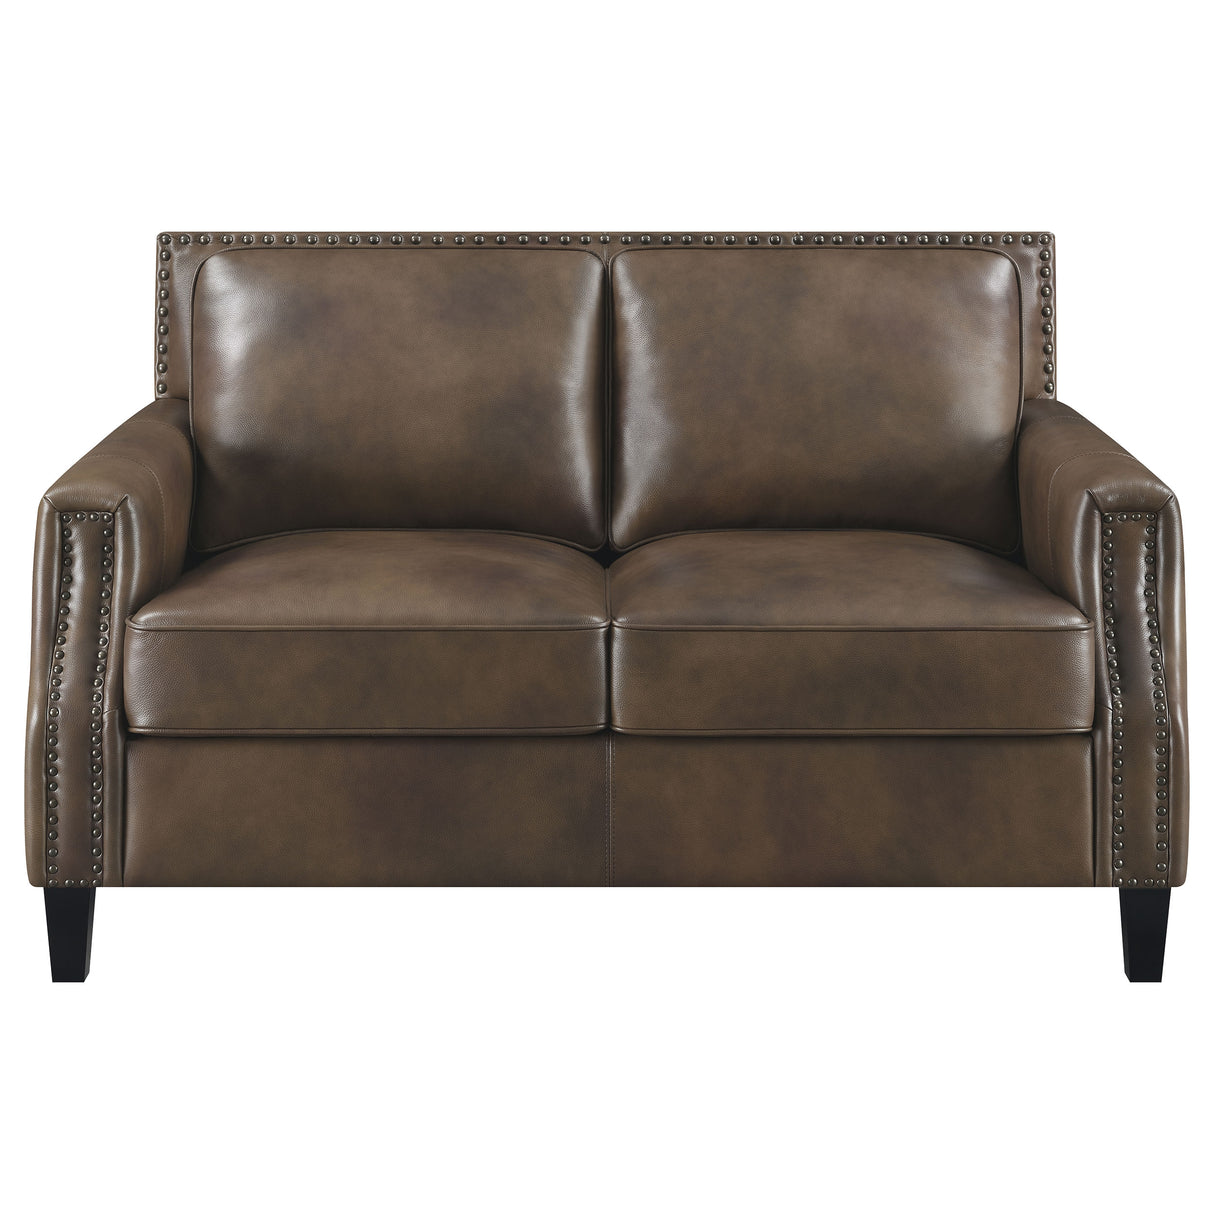 Loveseat - Leaton Upholstered Recessed Arms Loveseat Brown Sugar